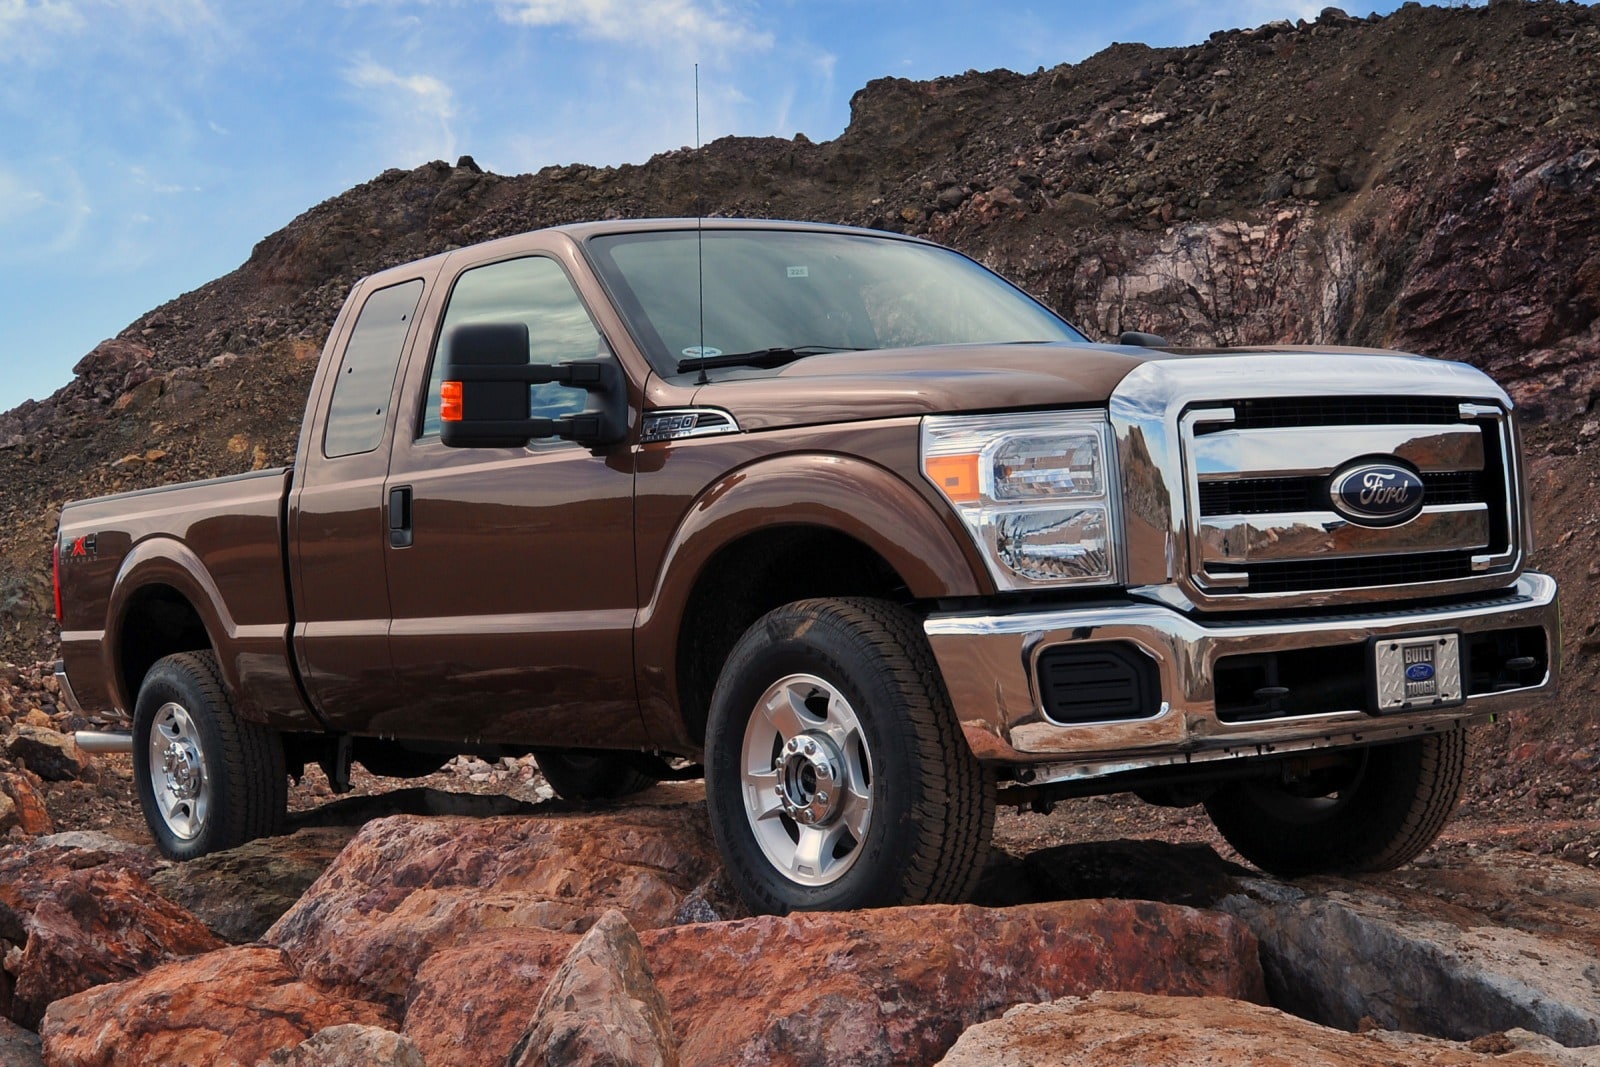 2014 Ford F-350 Super Duty Review & Ratings | Edmunds